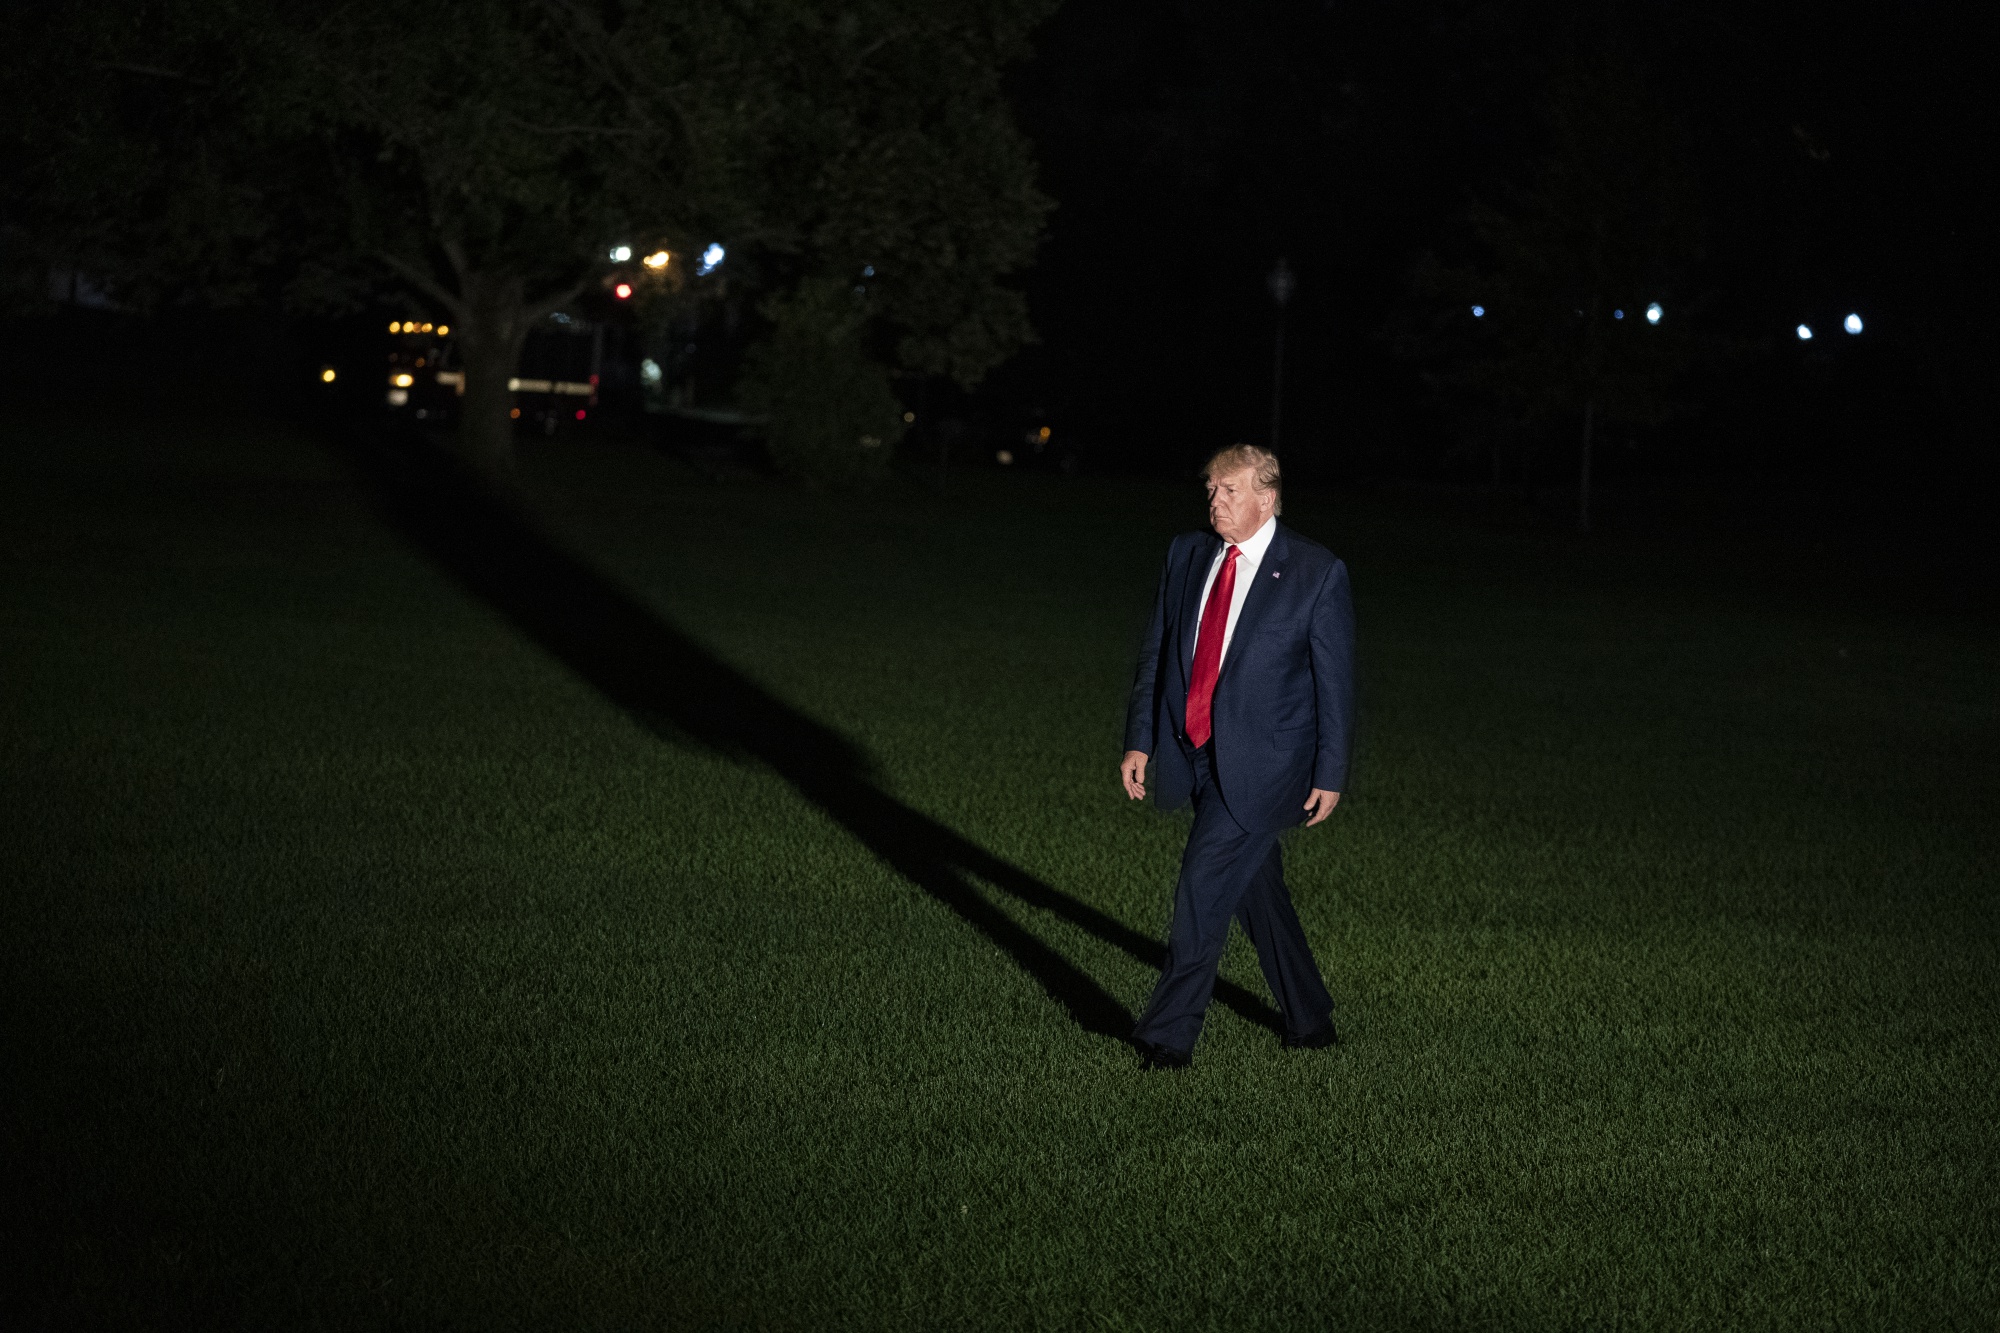 Trump walks across the South Lawn of the White House after arriving on Marine One in Washington, D.C. on July 12, 2019.